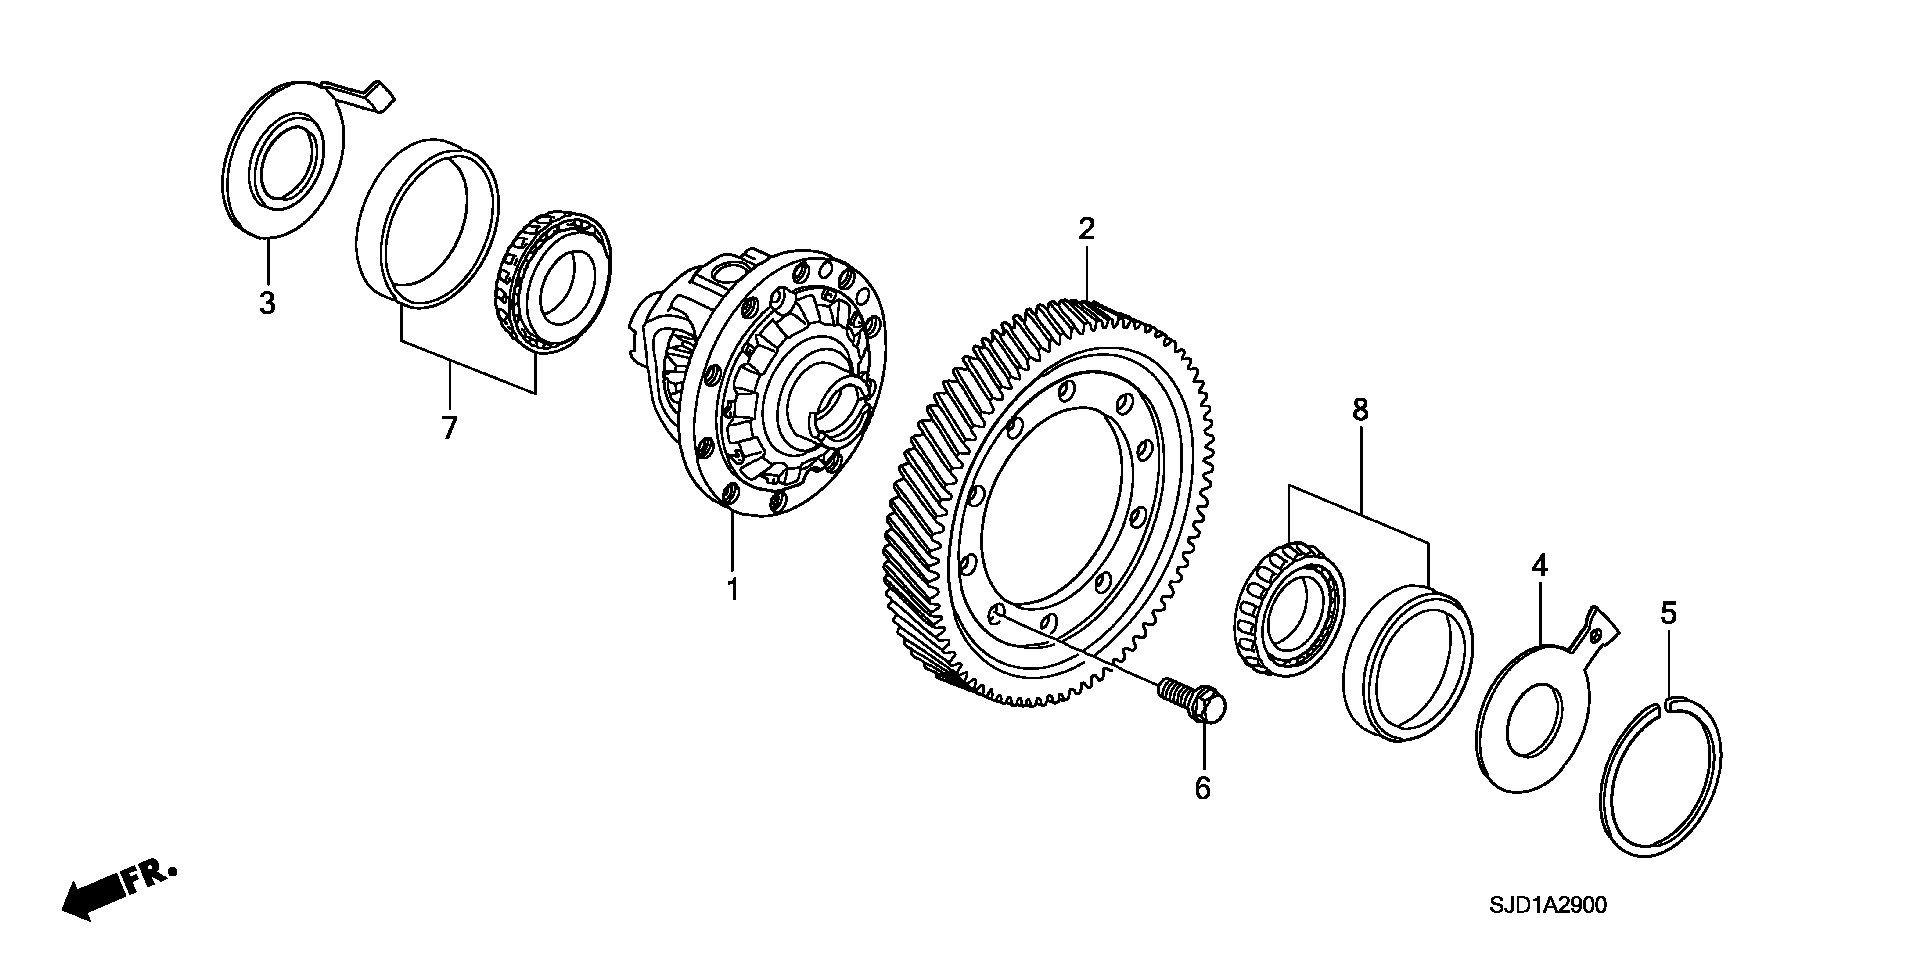 DIFFERENTIAL(2.4L)